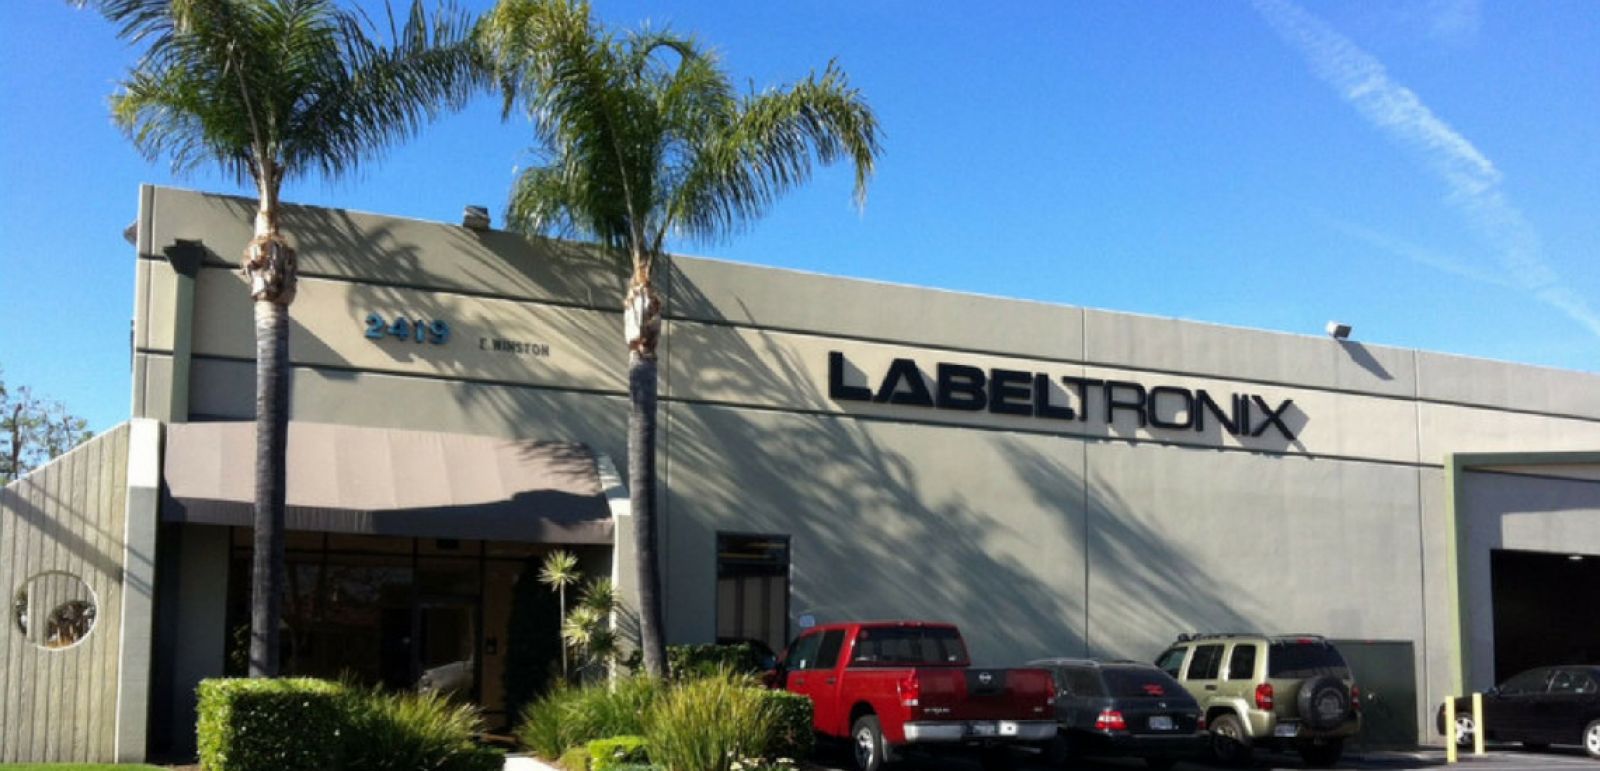 Photo for: Labeltronix – Southern California’s Leading Label Provider